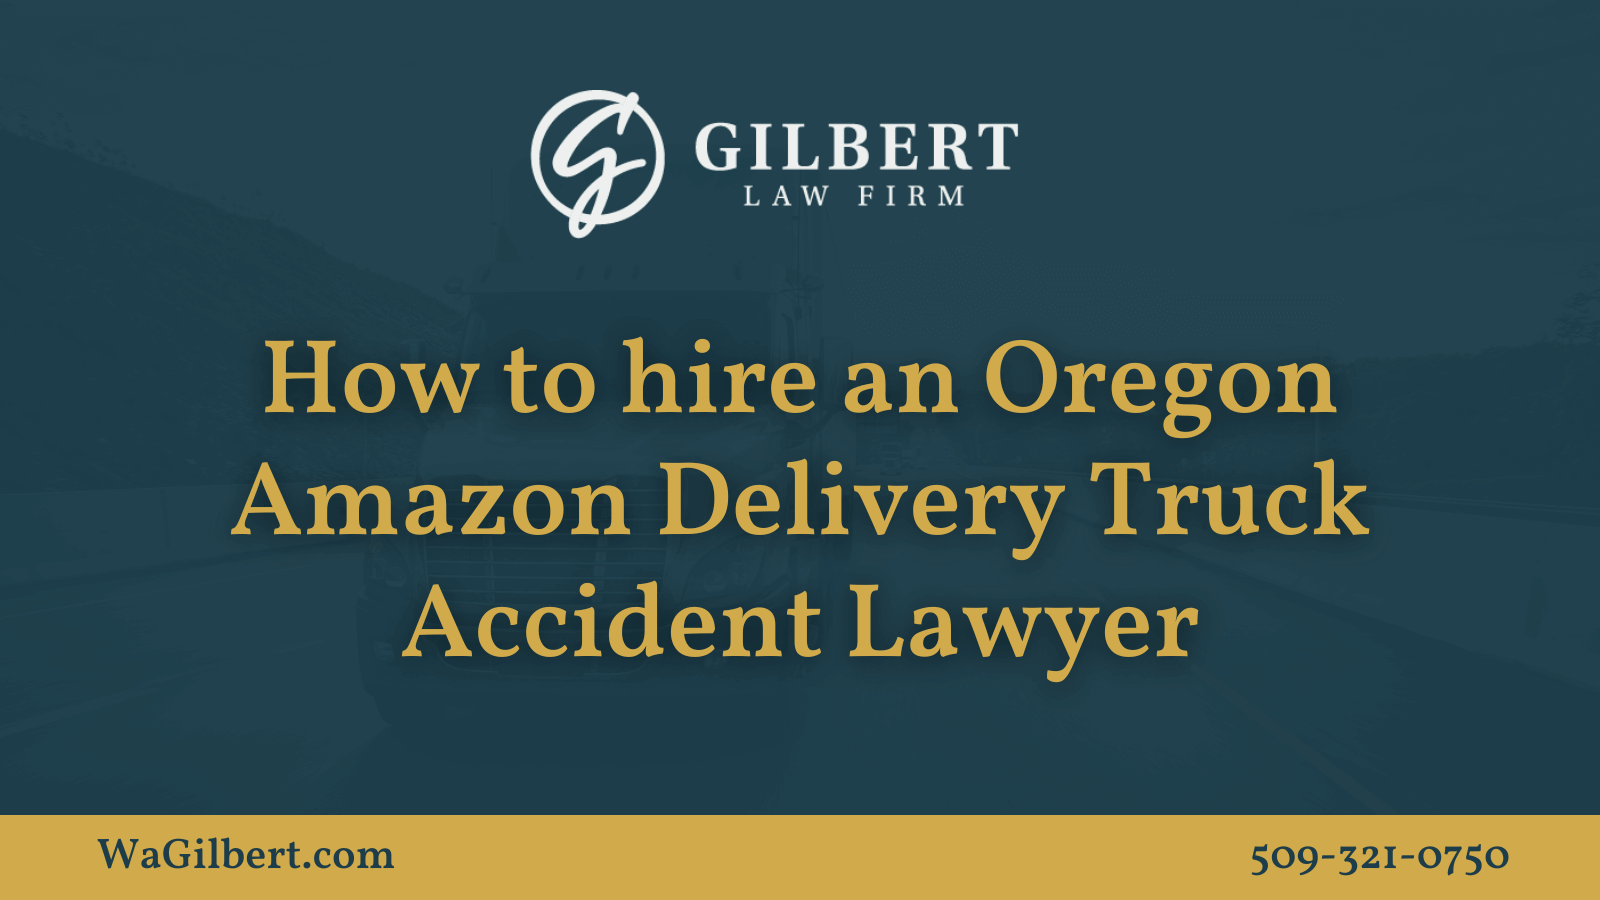 How to hire an Oregon Amazon Delivery Truck Accident Lawyer | Gilbert Law Firm Spokane Washington